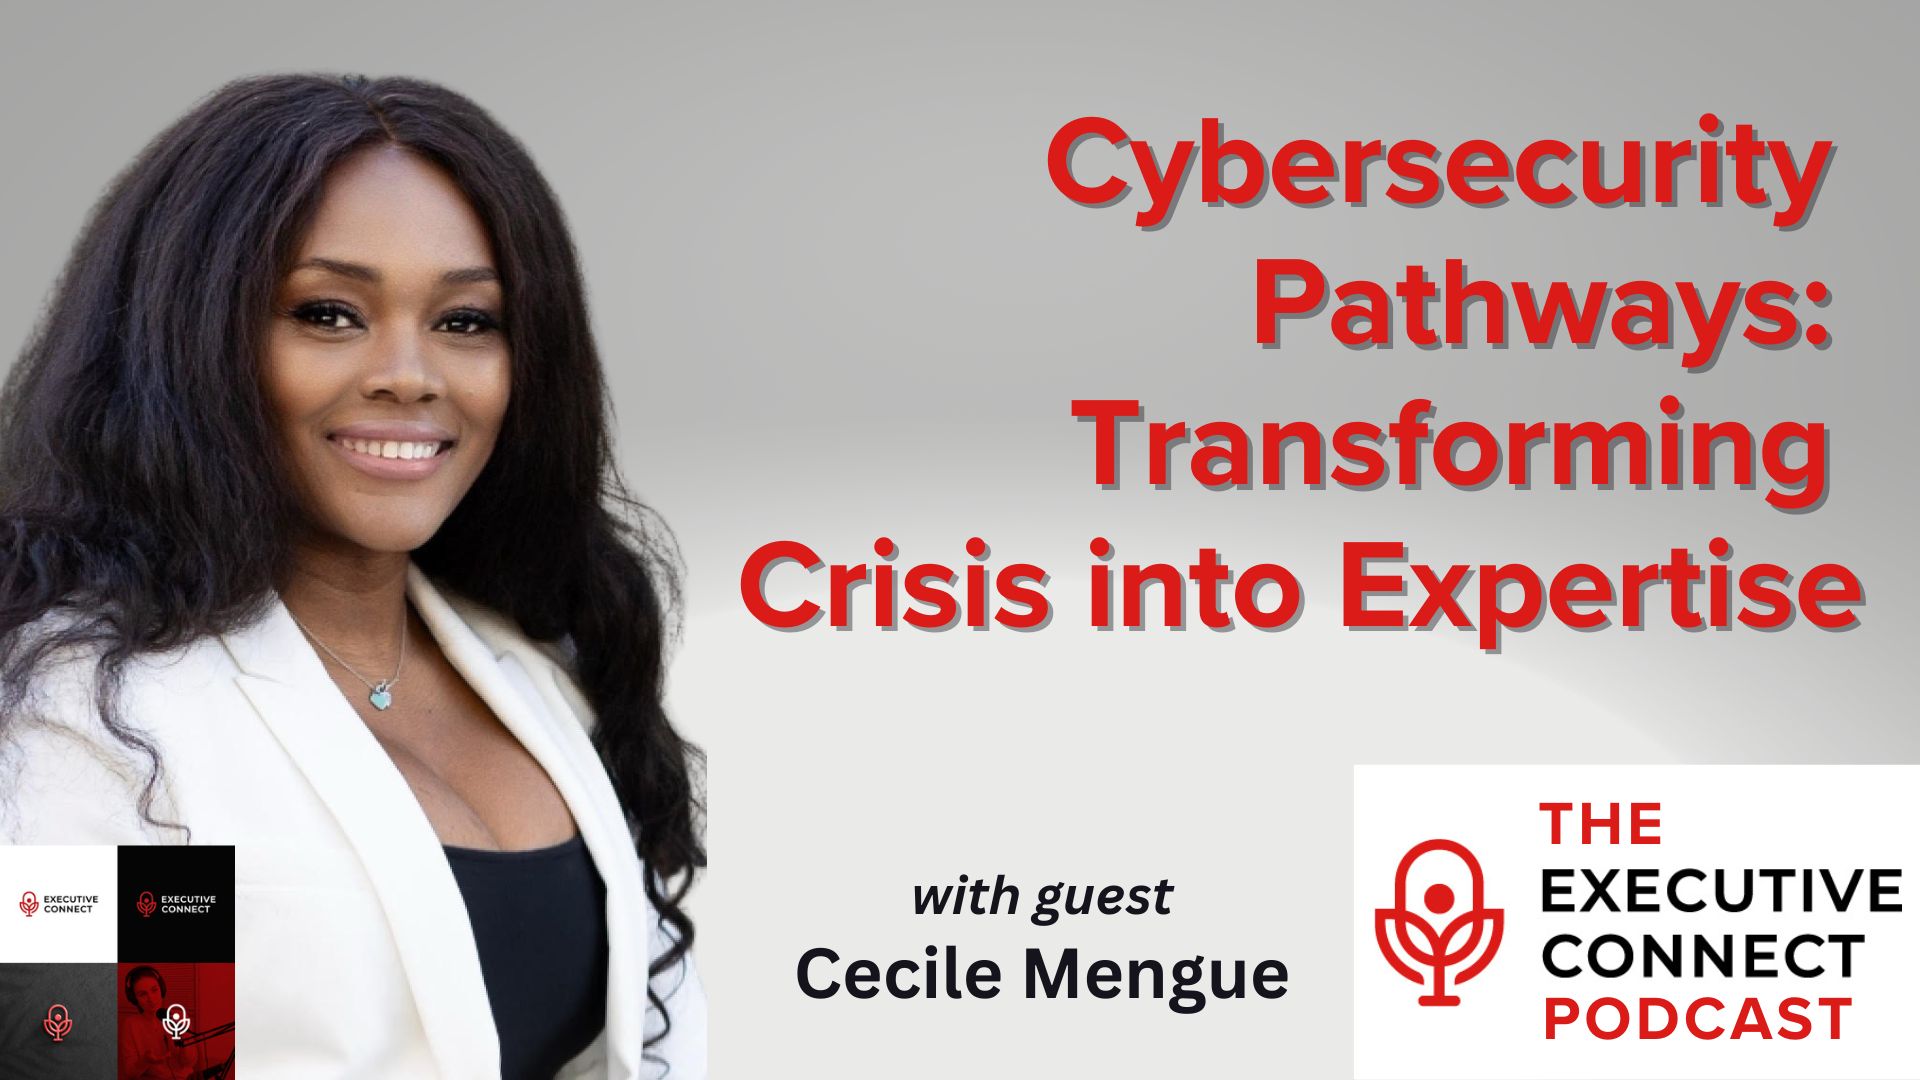 Podcast – Cybersecurity Pathways: Transforming Crisis into Expertise